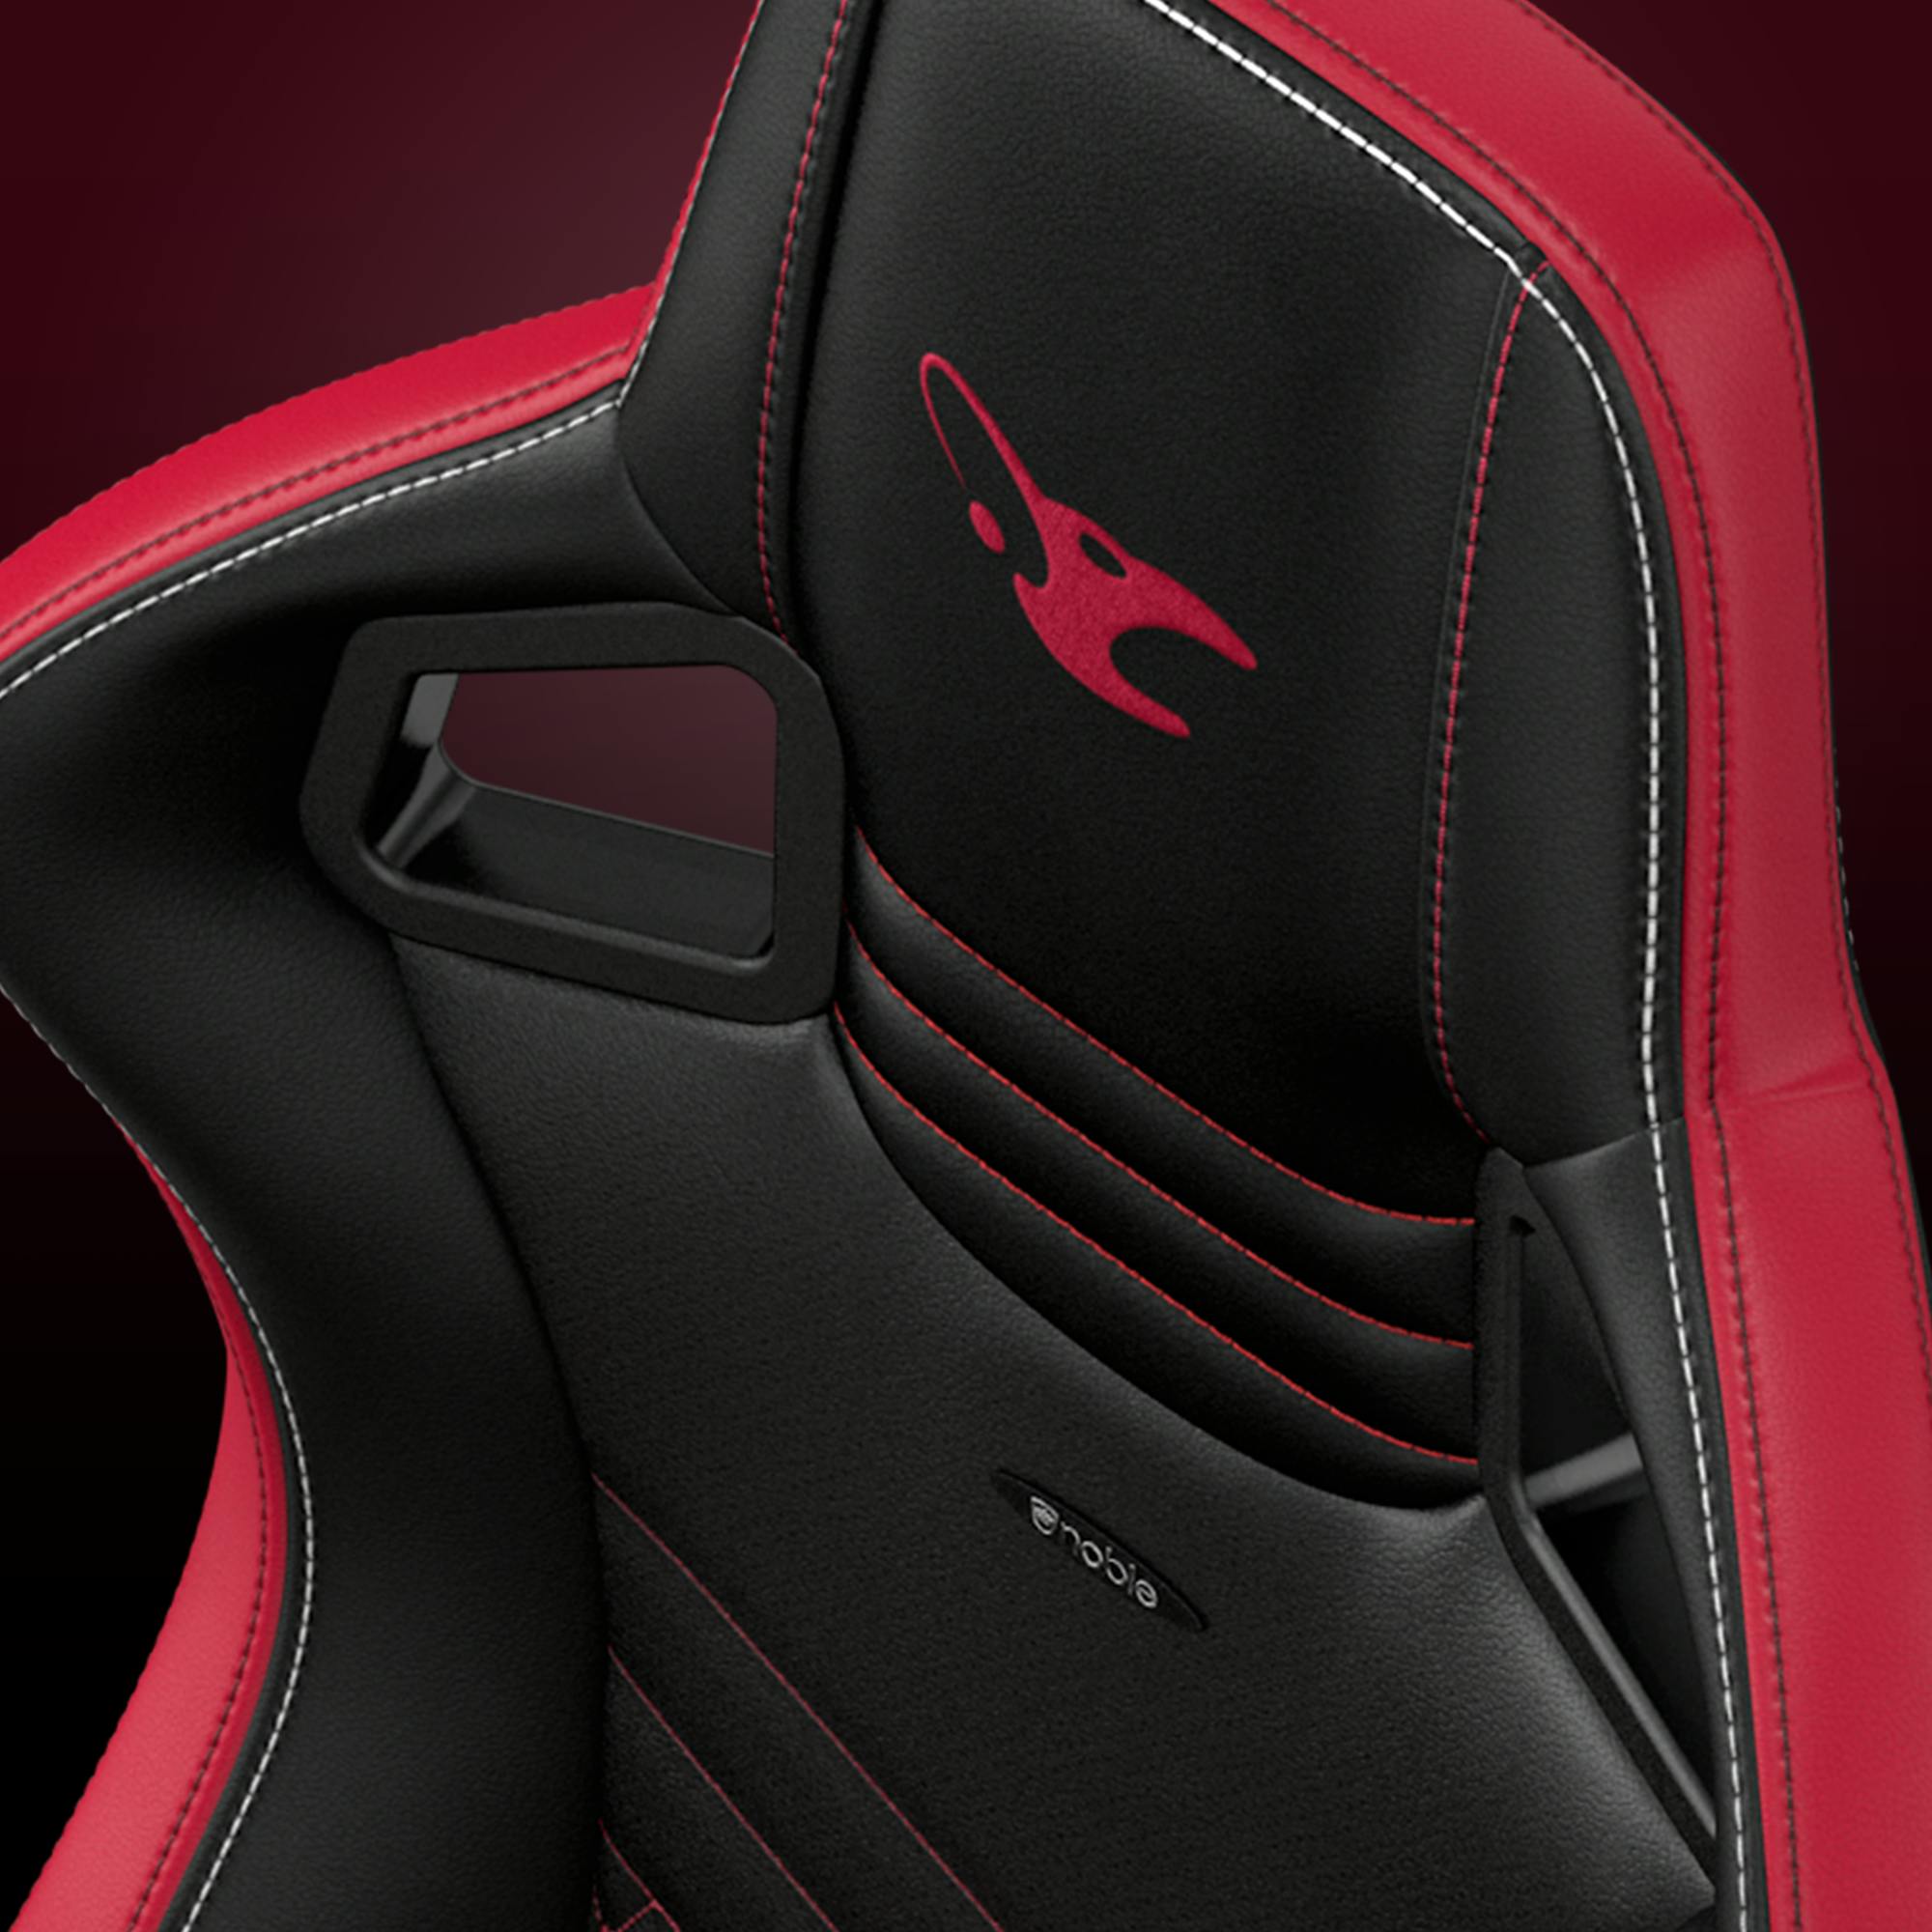 Gaming Chair Mousesports Vegan PU Leather Highlighted Details View